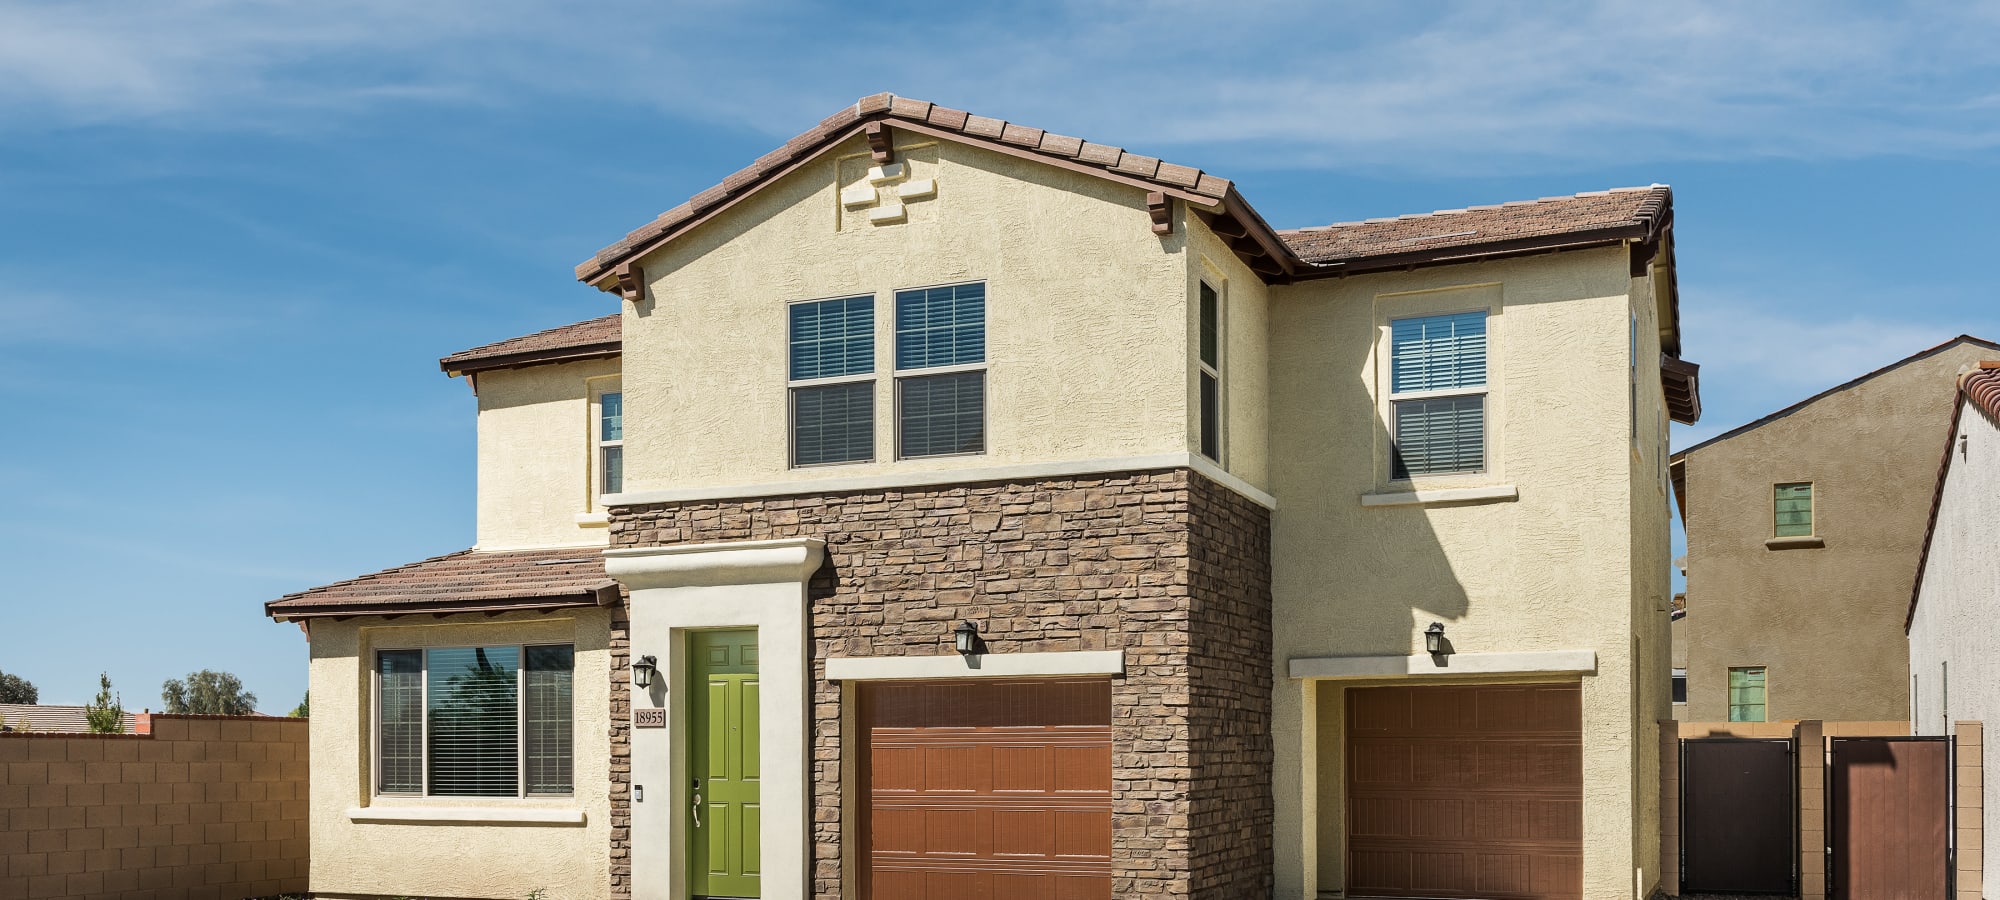 Home Exterior at Las Casas at Windrose in Litchfield Park, Arizona 